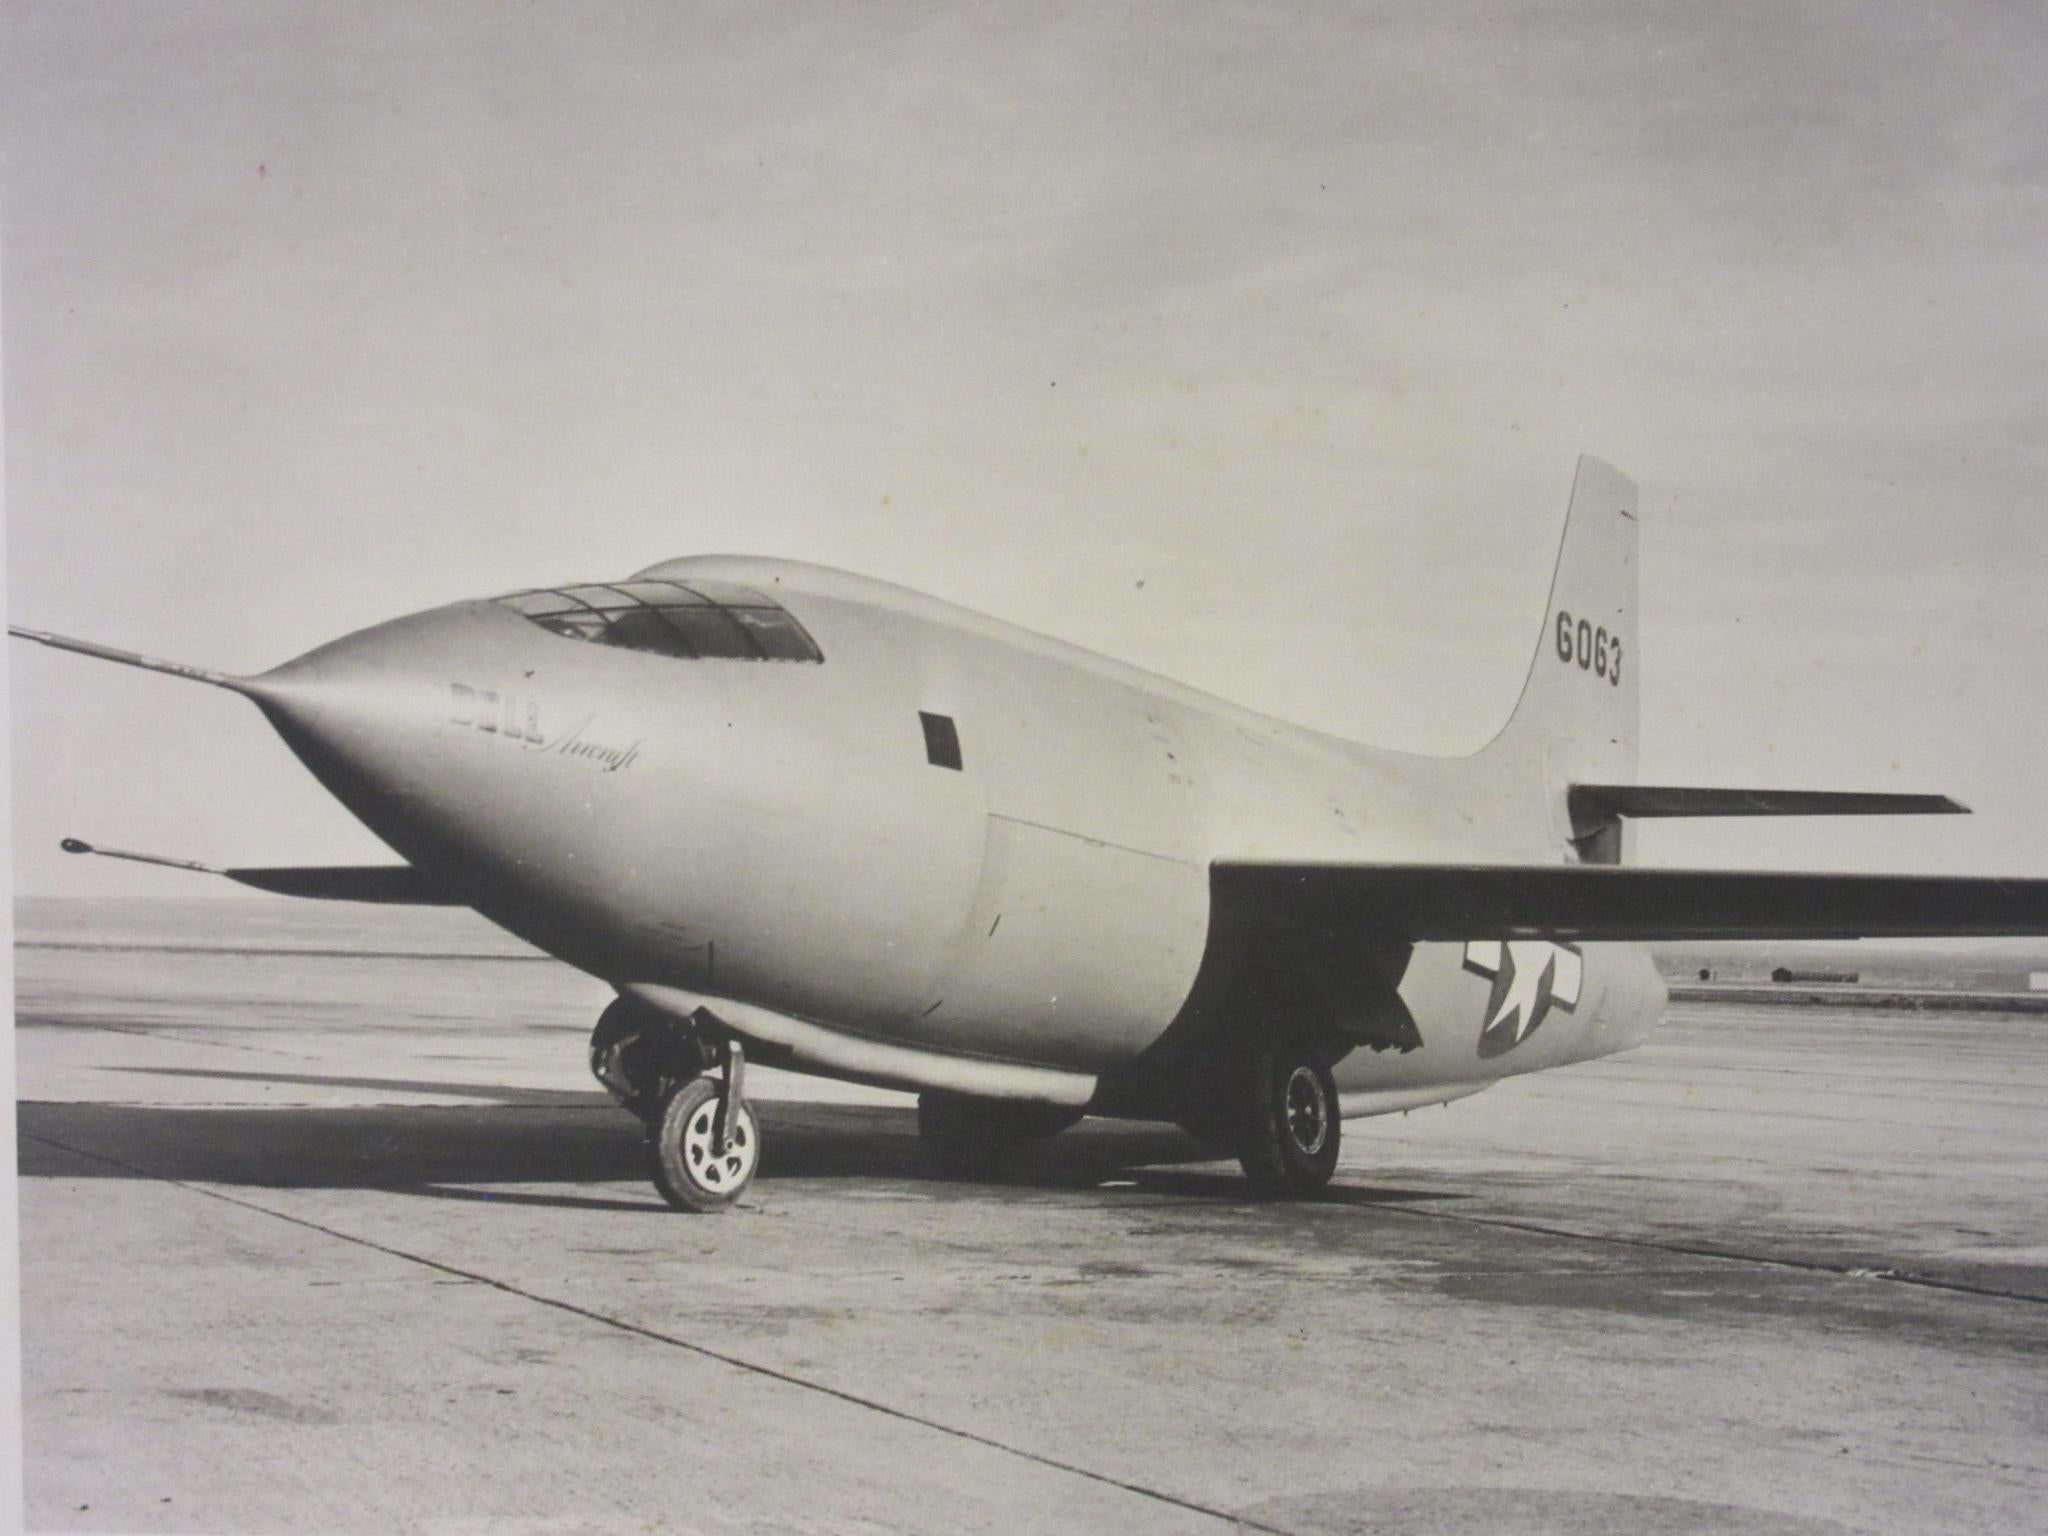 A manufactures photo of one of the historic X-1 super sonic aircraft that first broke the sound barrier with pilots like legendary Charles (Chuck) E. Yeager on October 14th 1947. The aircraft tail number 6063 may be the one flown before the record